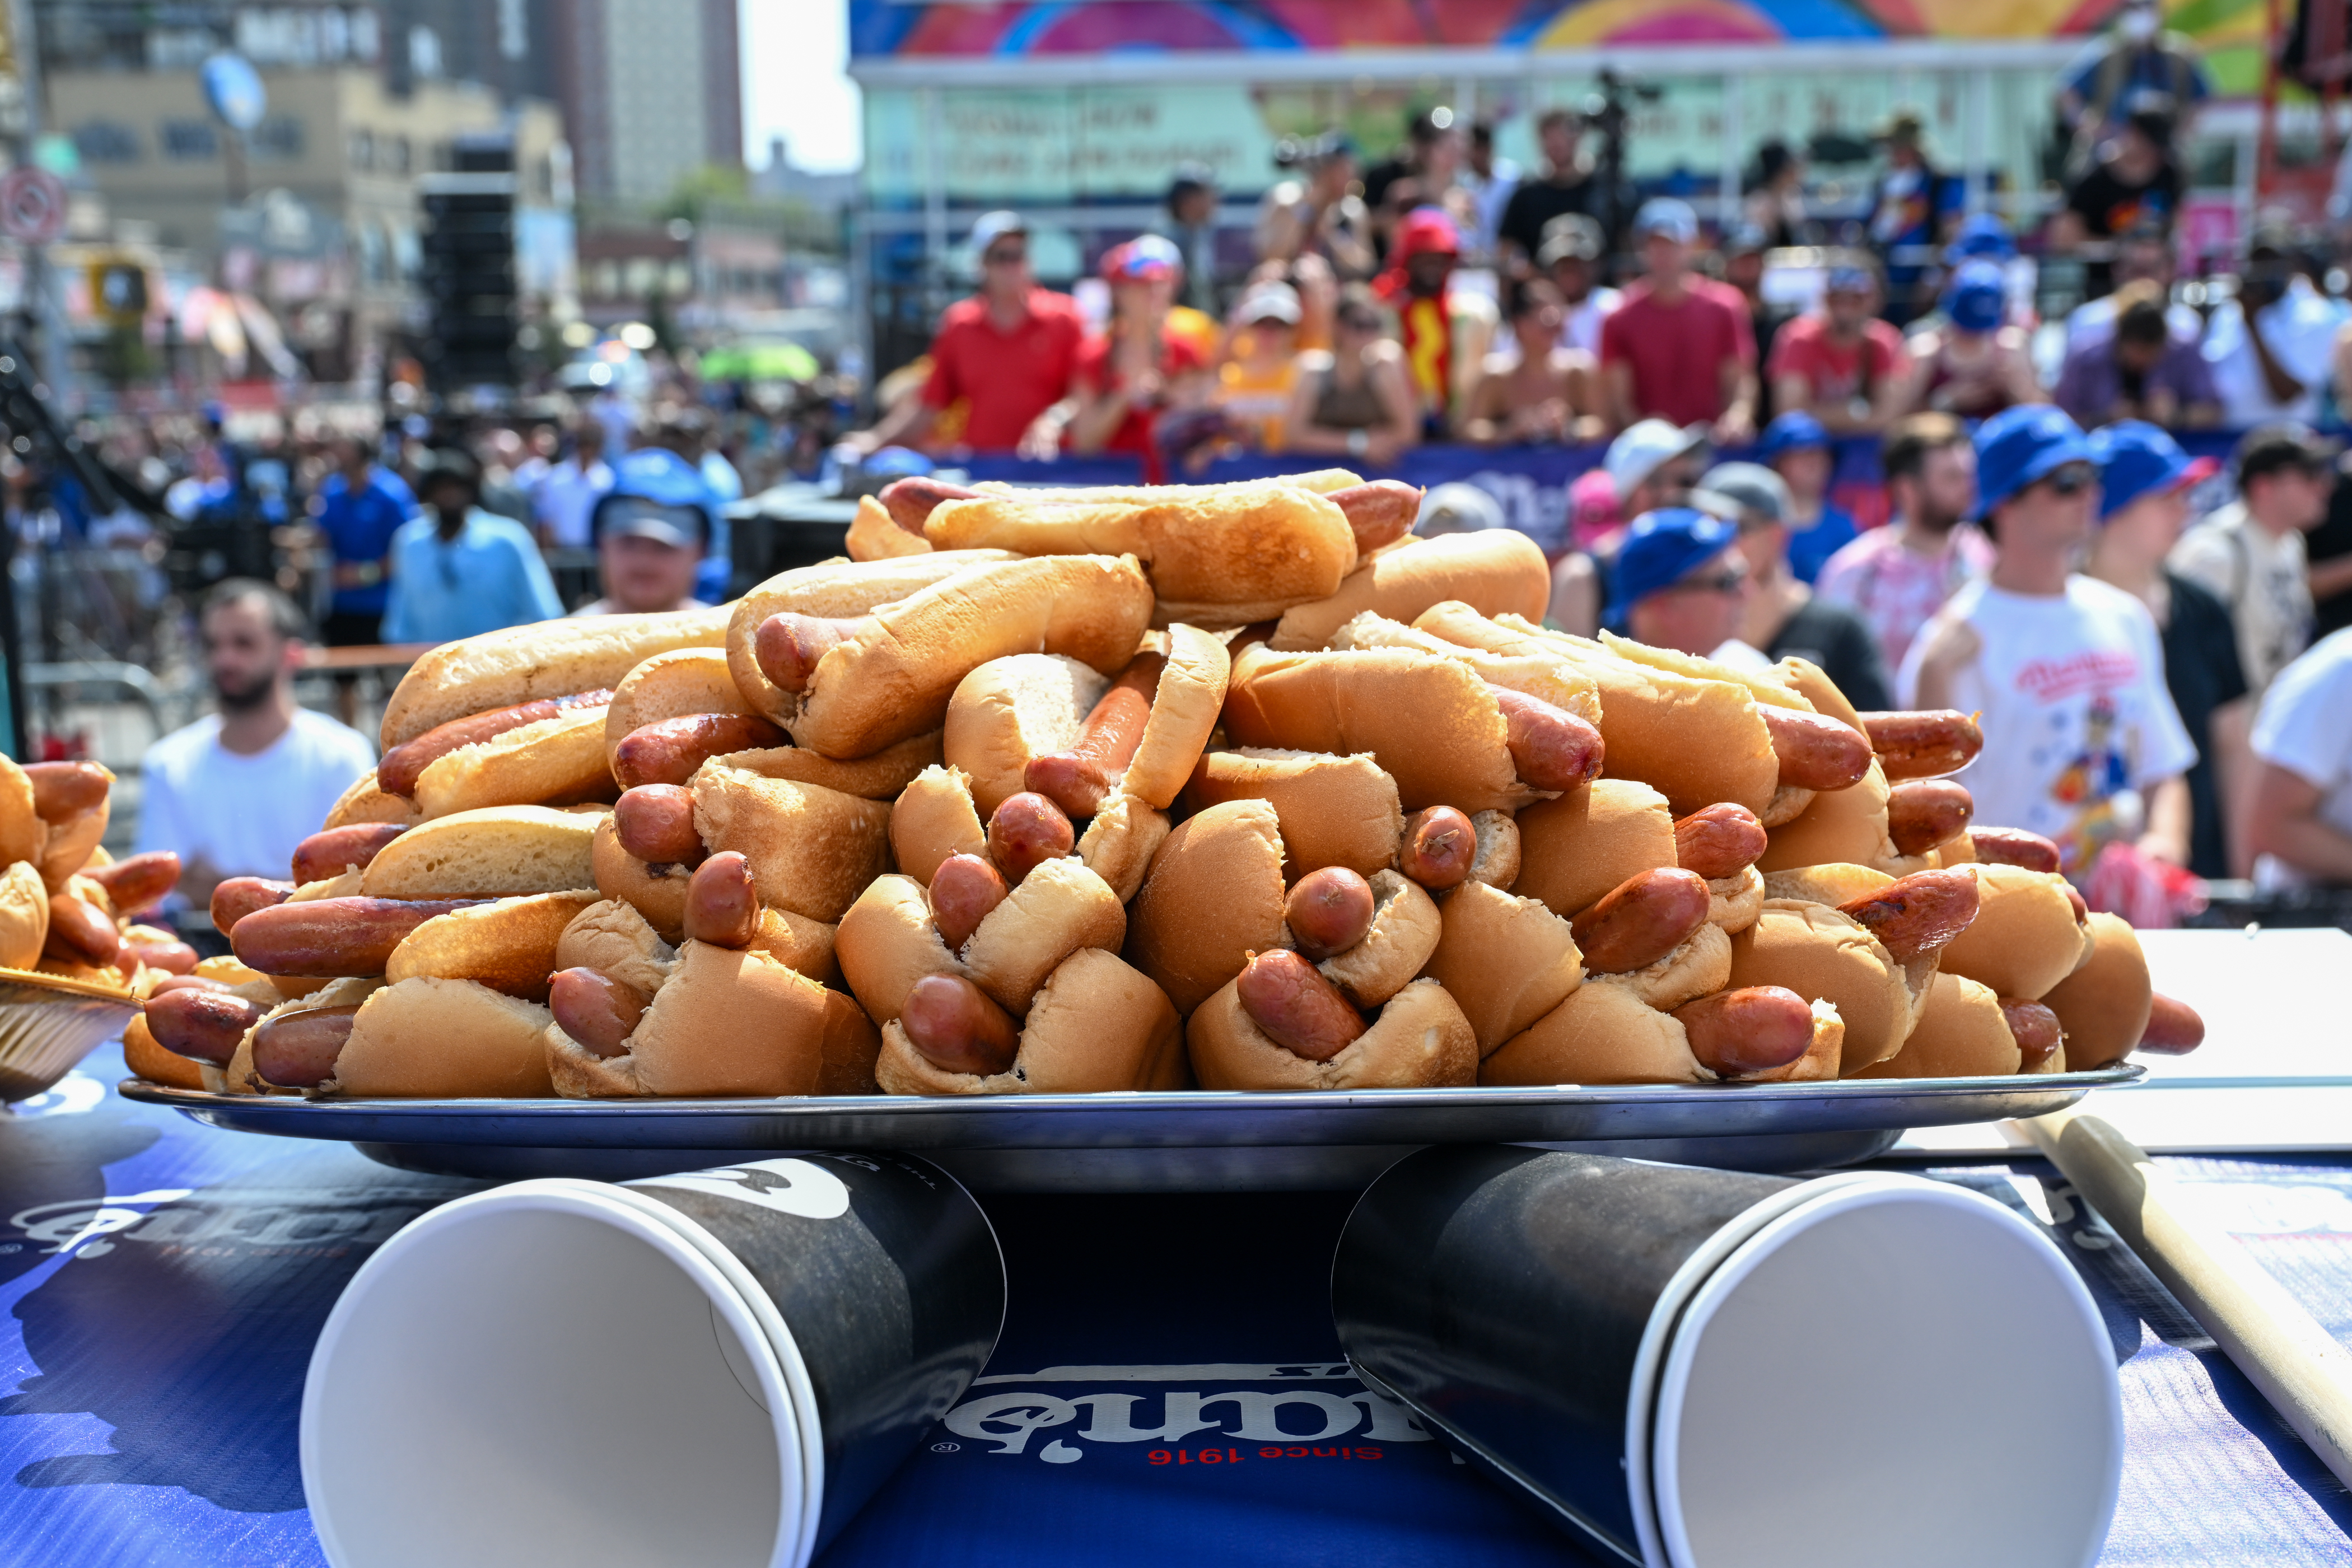 Hot dogs are placed on the competition table ahead of the 2023 Nathan’s Famous Fourth of July International Hot Dog Eating Contest at Coney Island on July 04, 2023 in the Brooklyn borough of New York City. The annual contest, which began in 1972, draws thousands of spectators to Nathan’s Famous located on Surf Avenue.